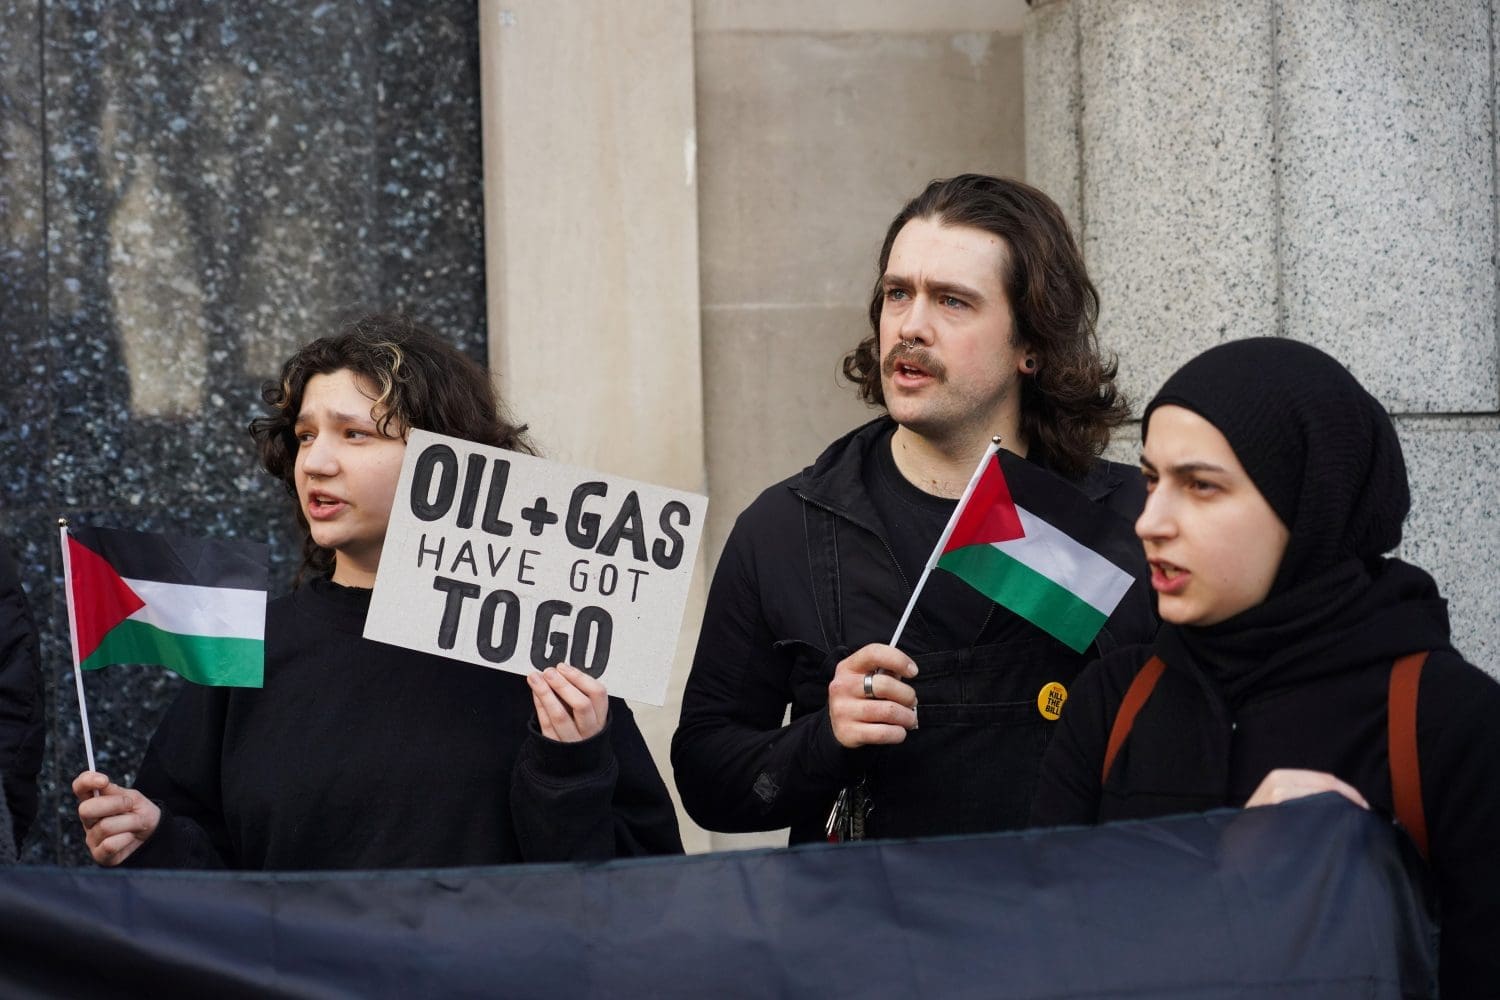 Activists hold Palestinian flags and a placard that reads "Oil + gas have got to go"